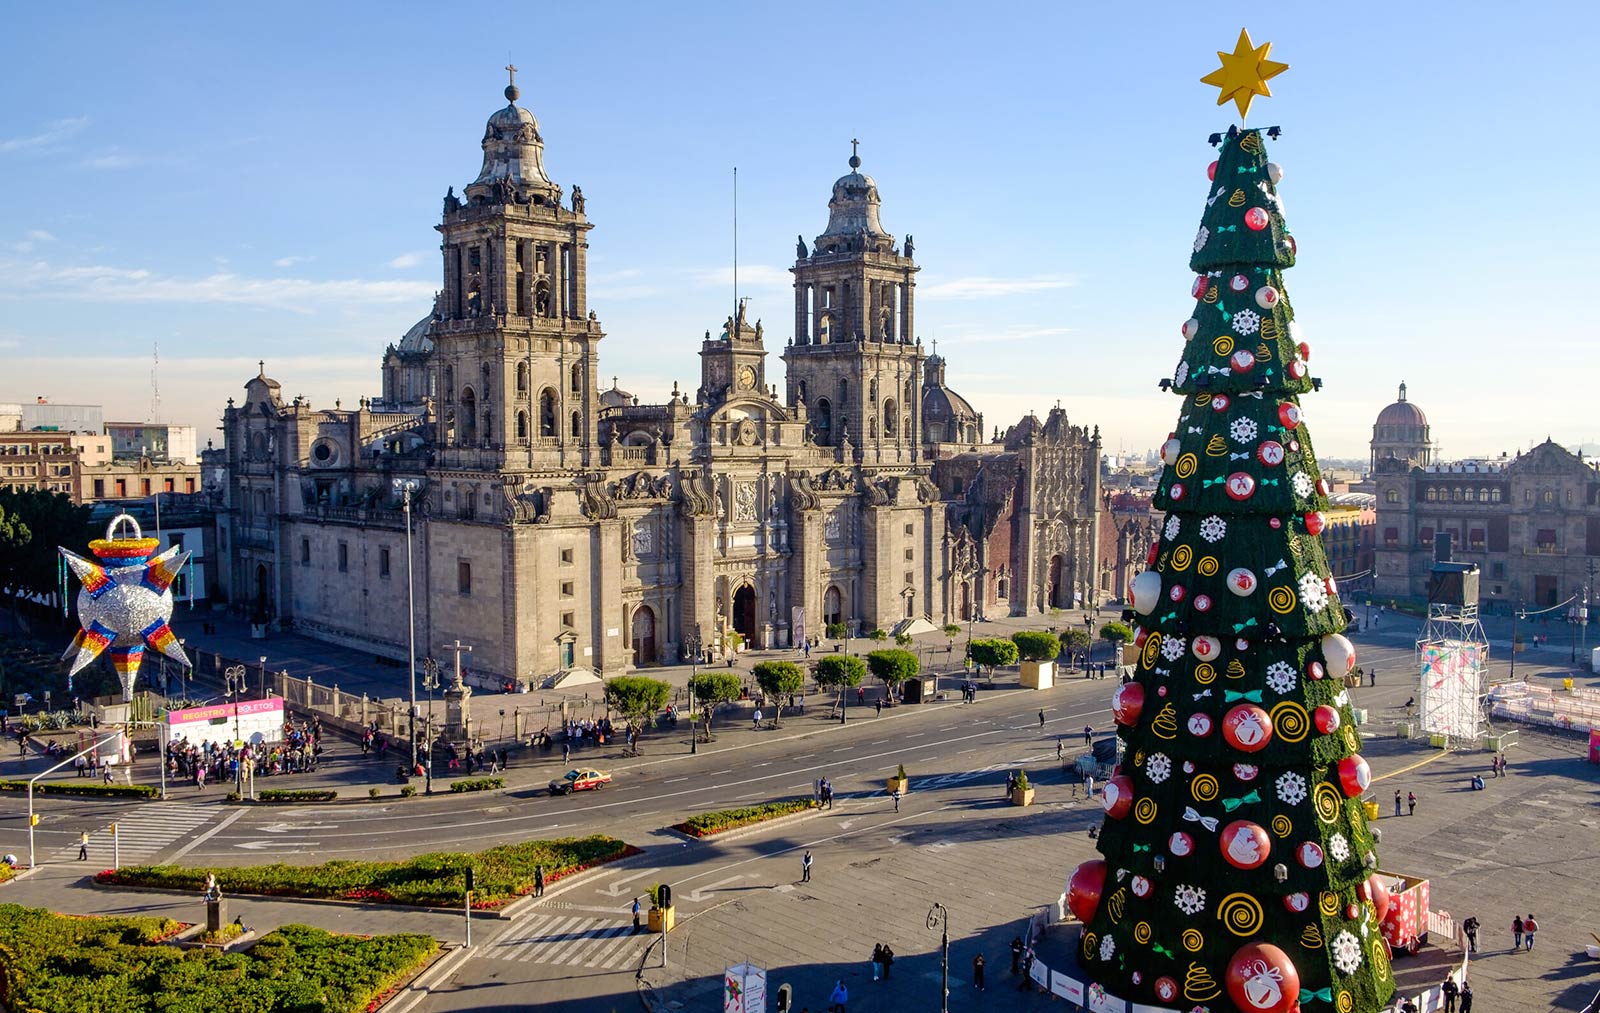 View of Zocalo, cathedral and Christmas tree in Mexico city